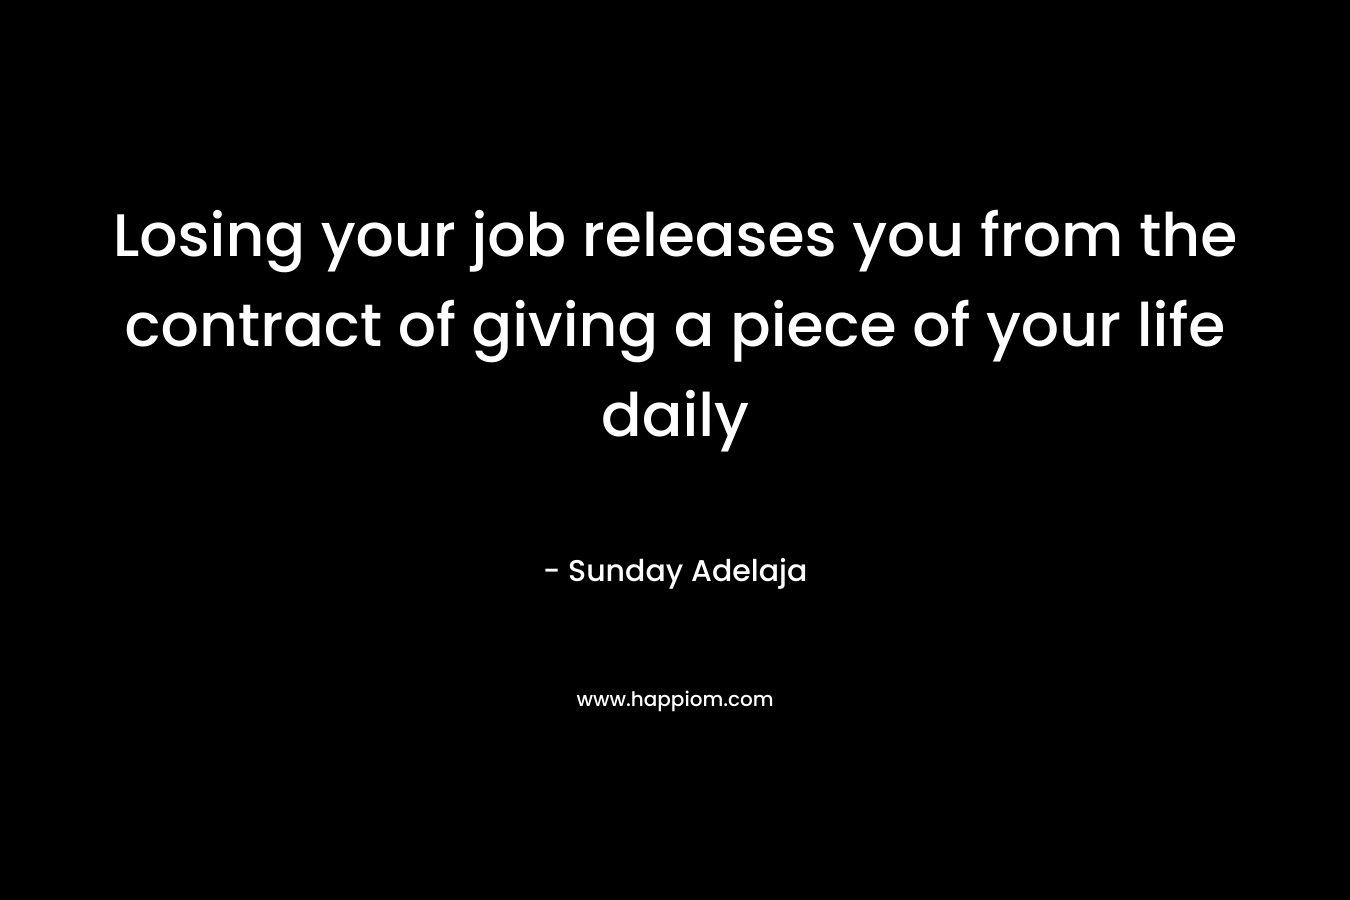 Losing your job releases you from the contract of giving a piece of your life daily